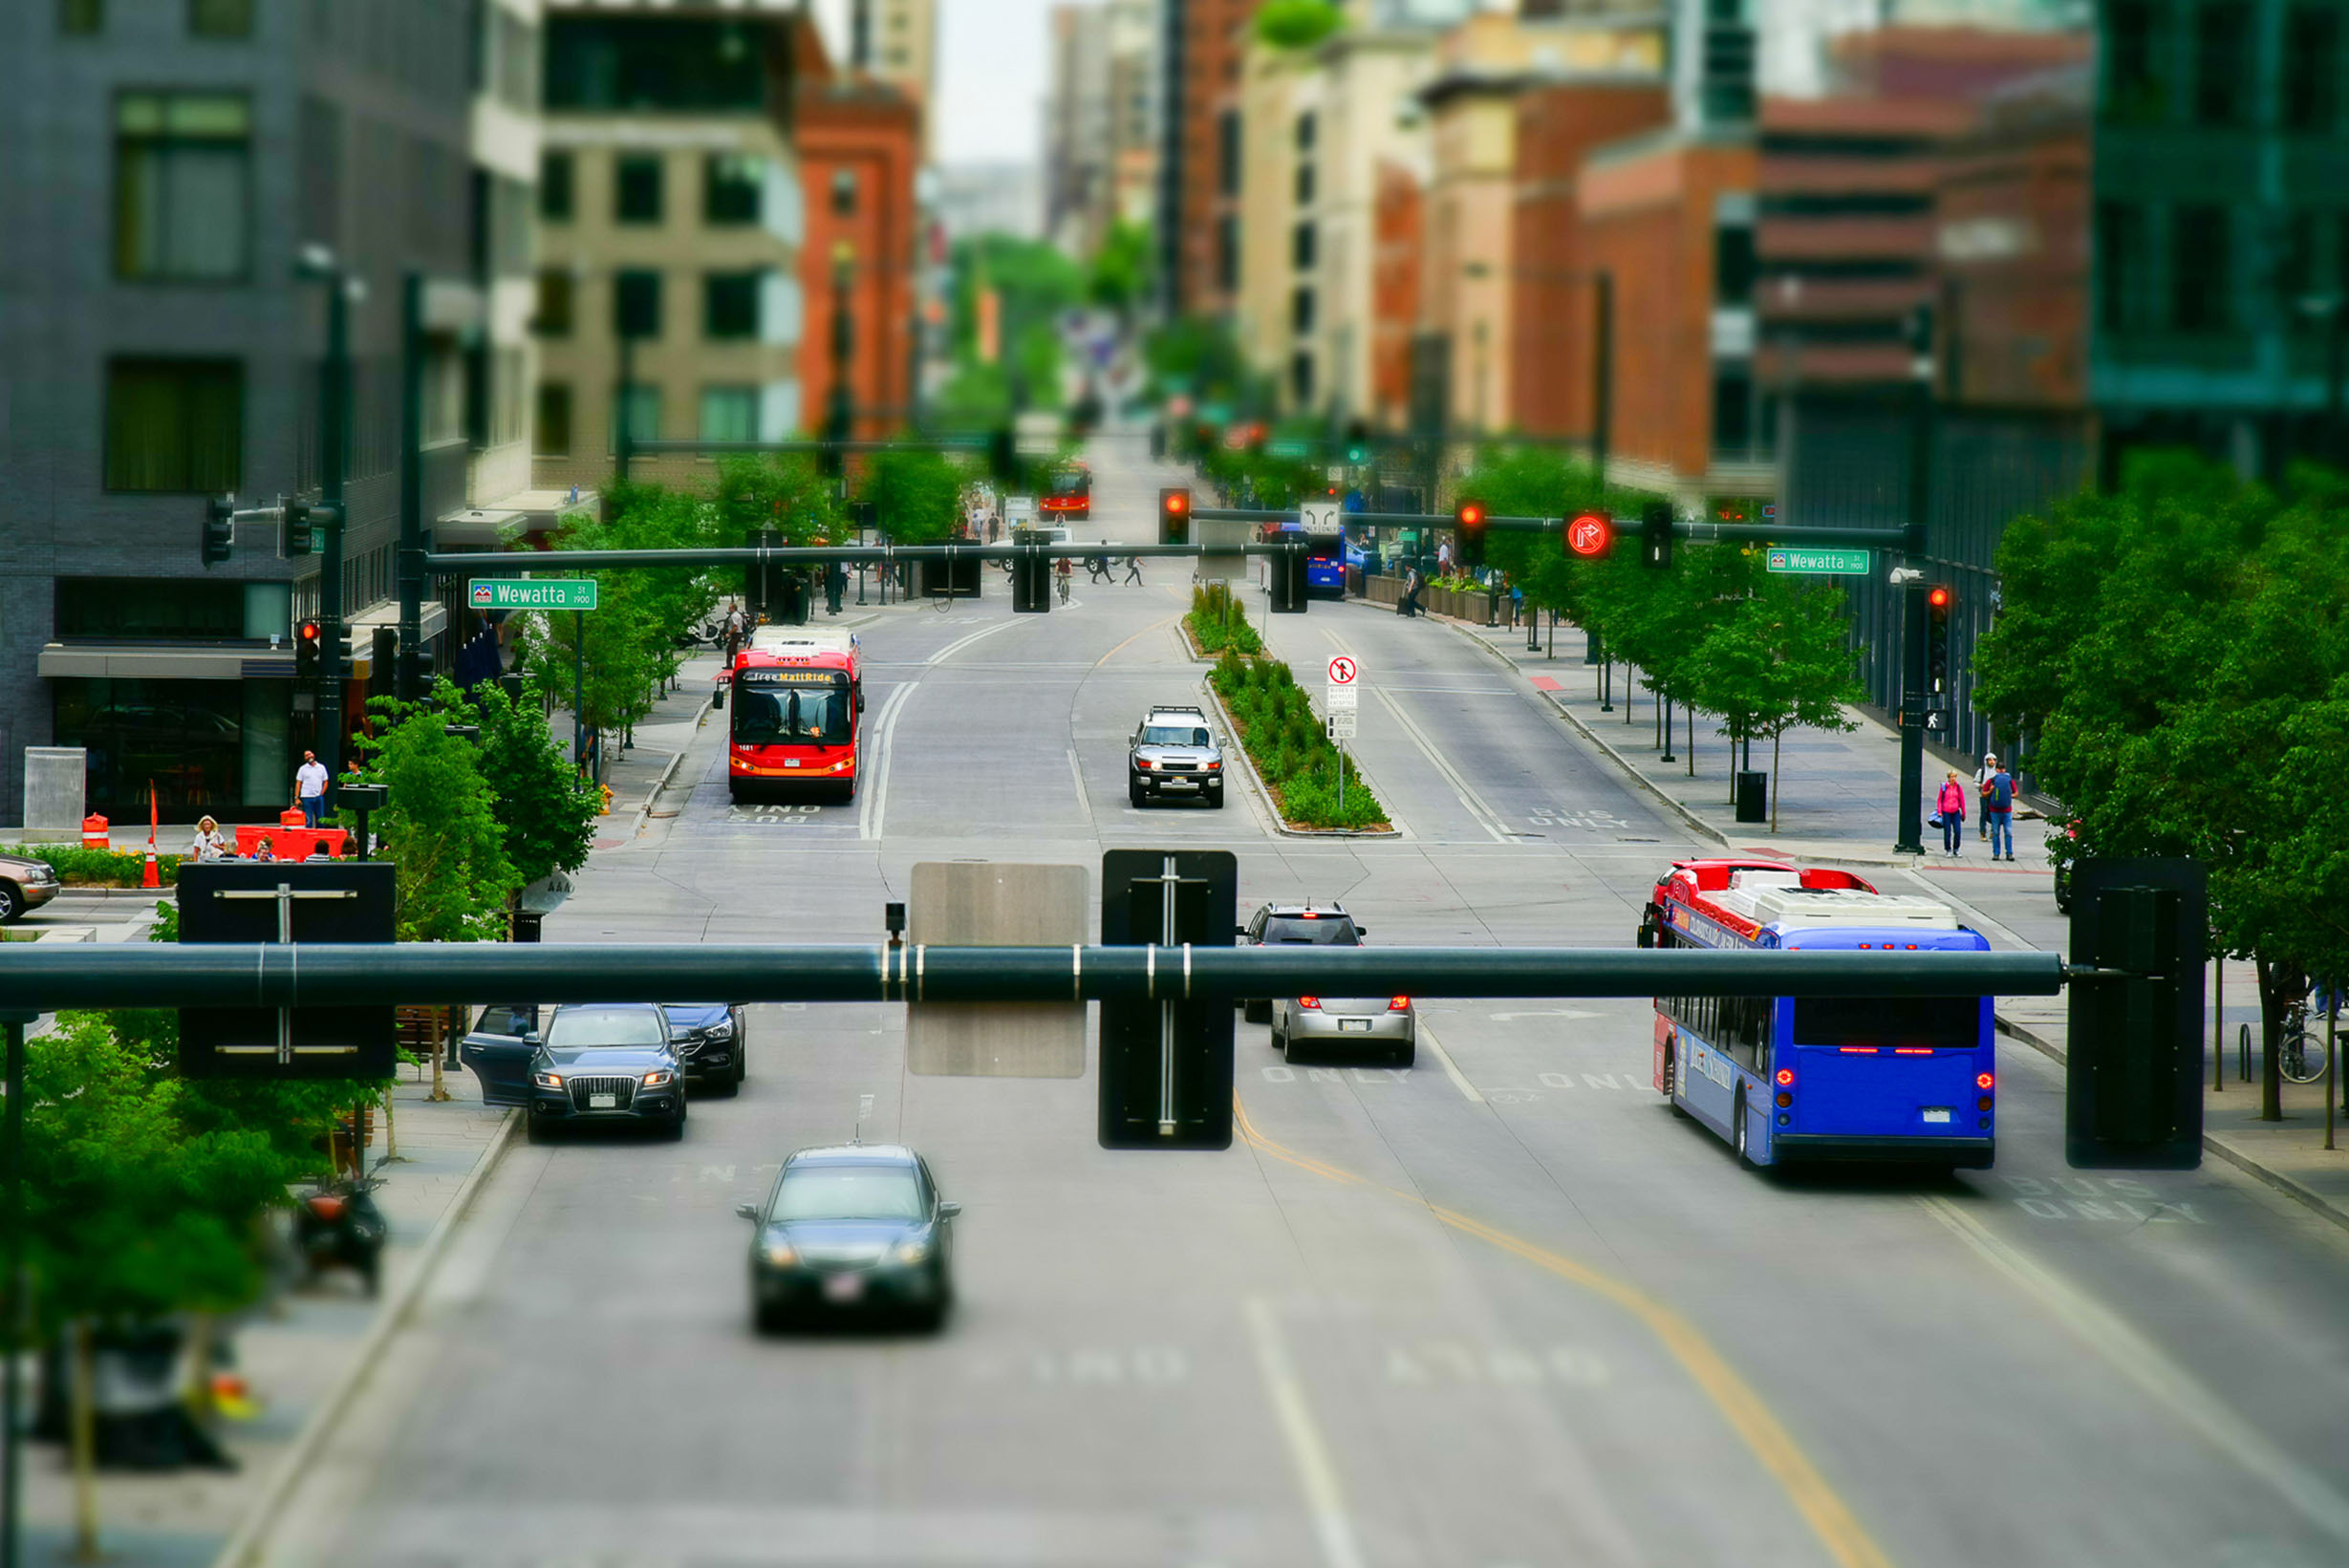 Cars, buses and people in an urban setting with busy streets and sidewalks.